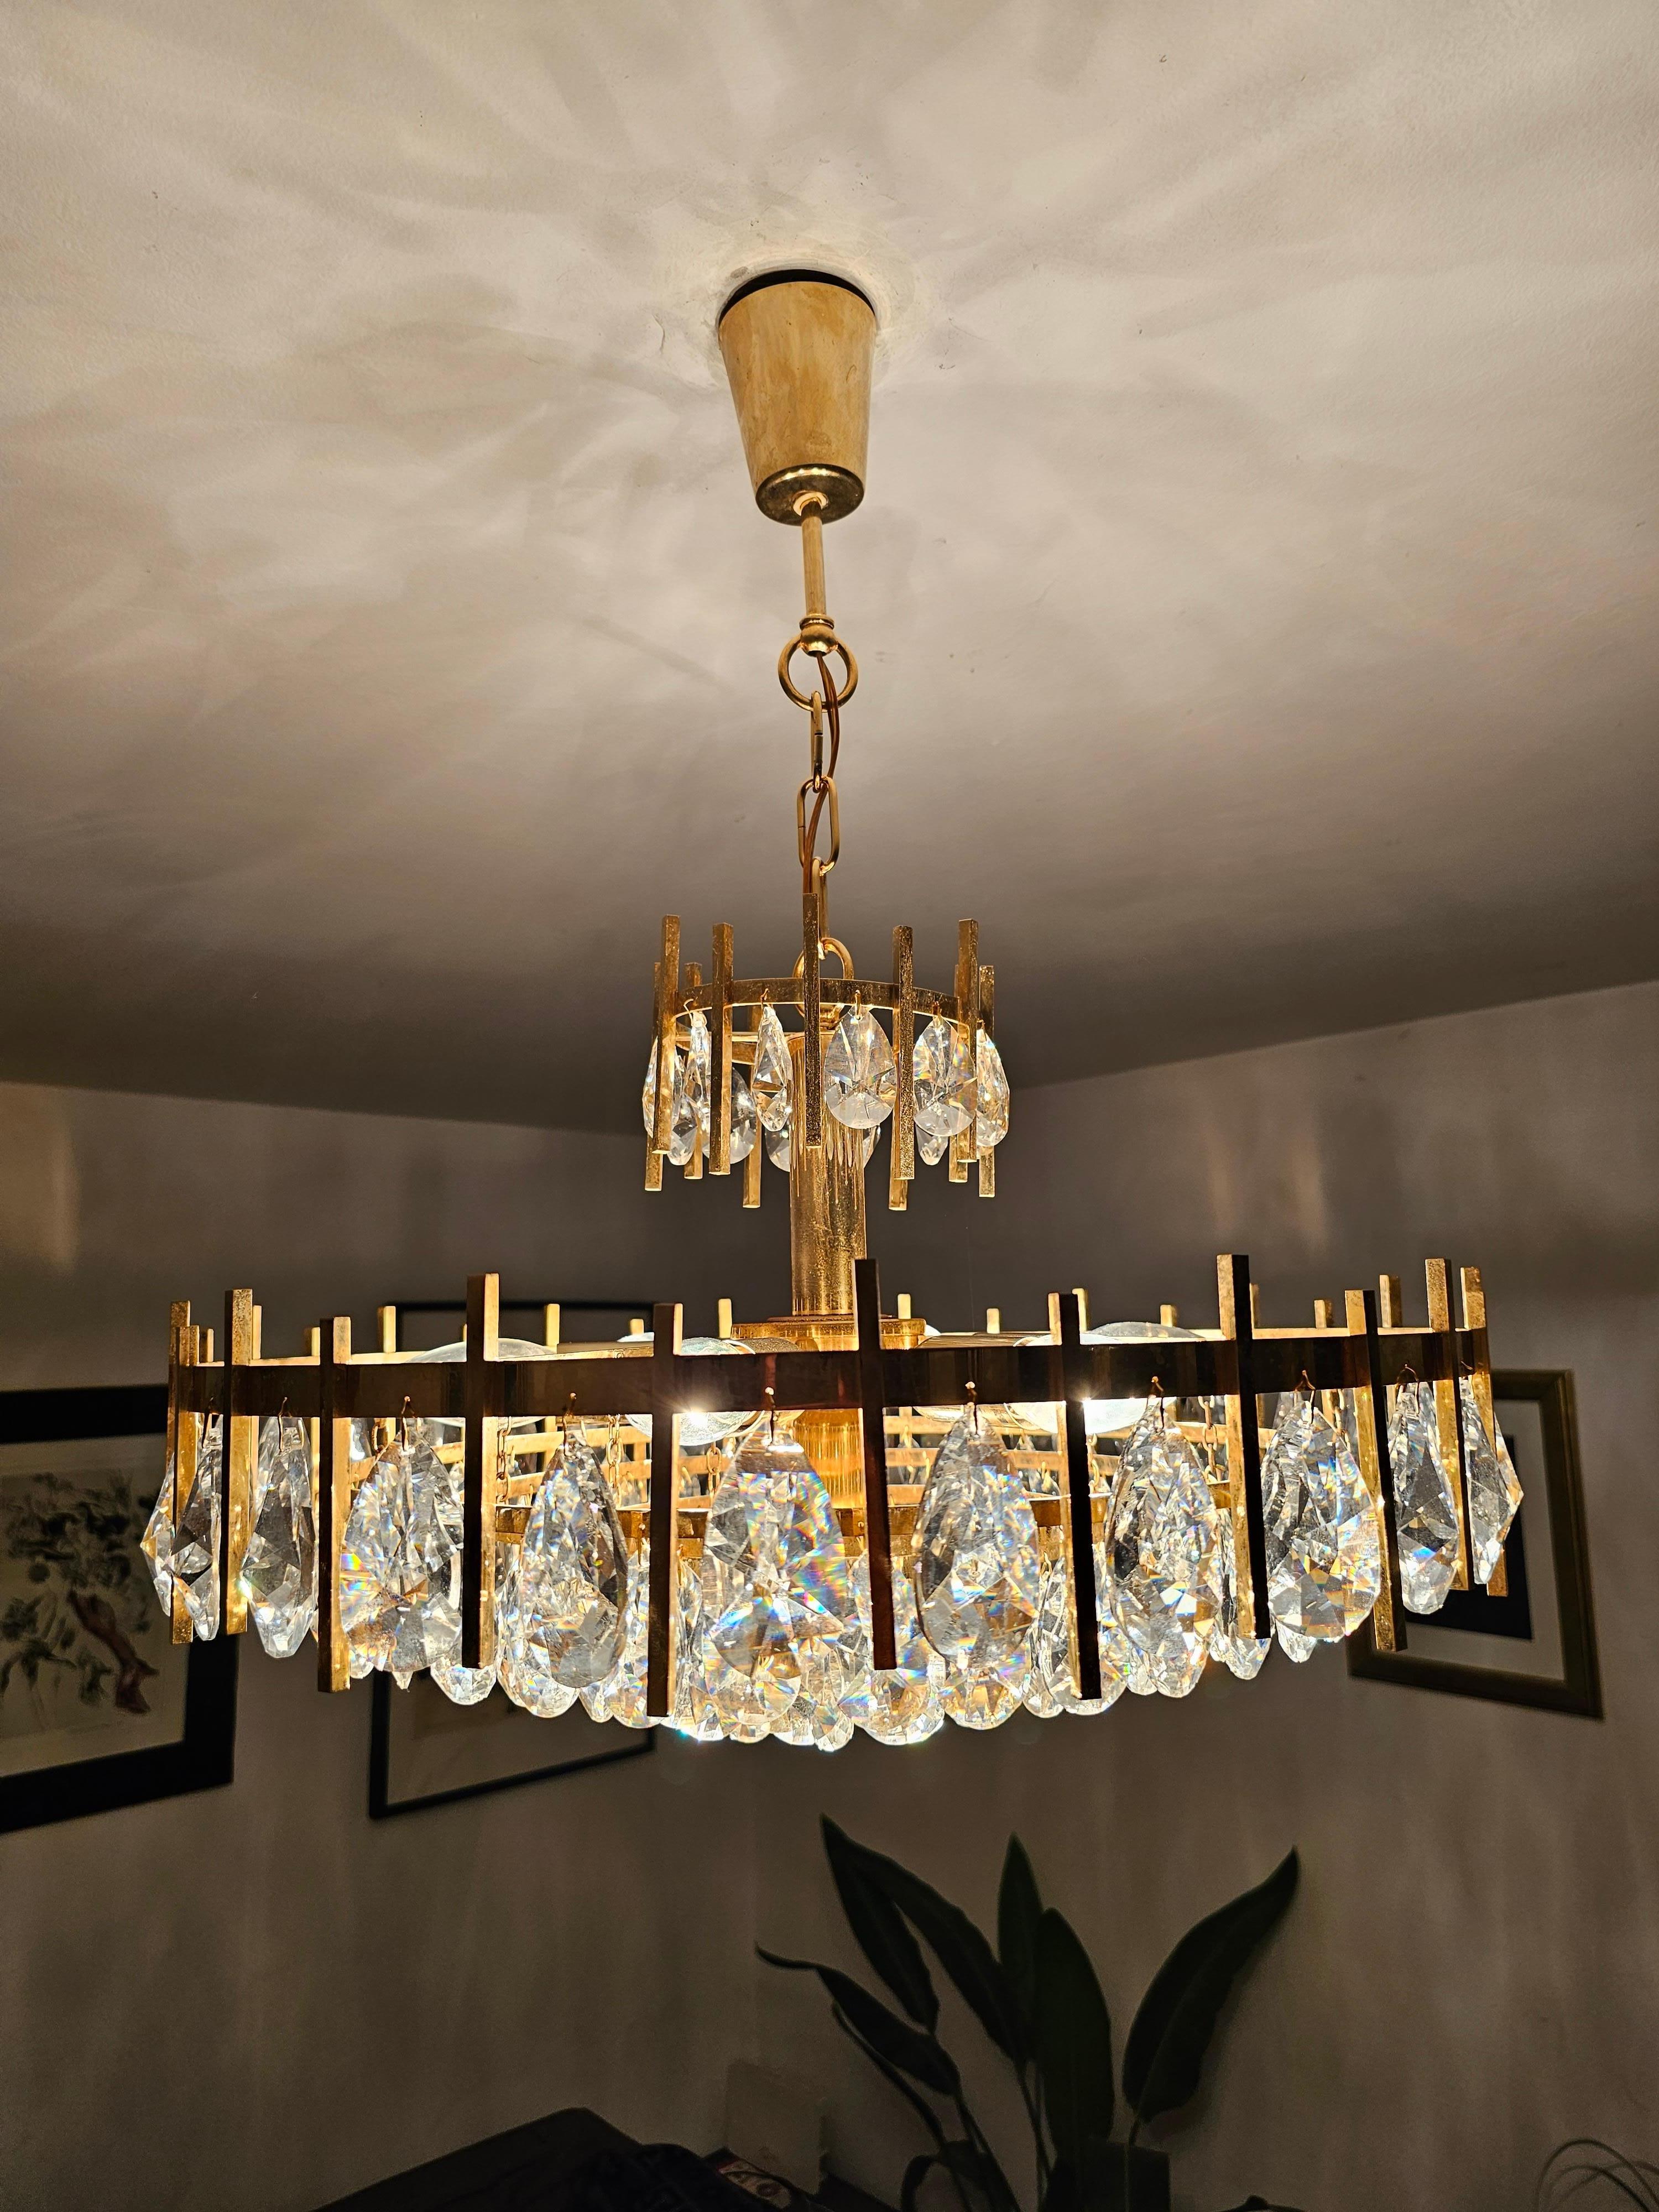 Austrian Mid Century Modern Crystal and Brass Chandelier by Bakalowits, Austria 1960s For Sale